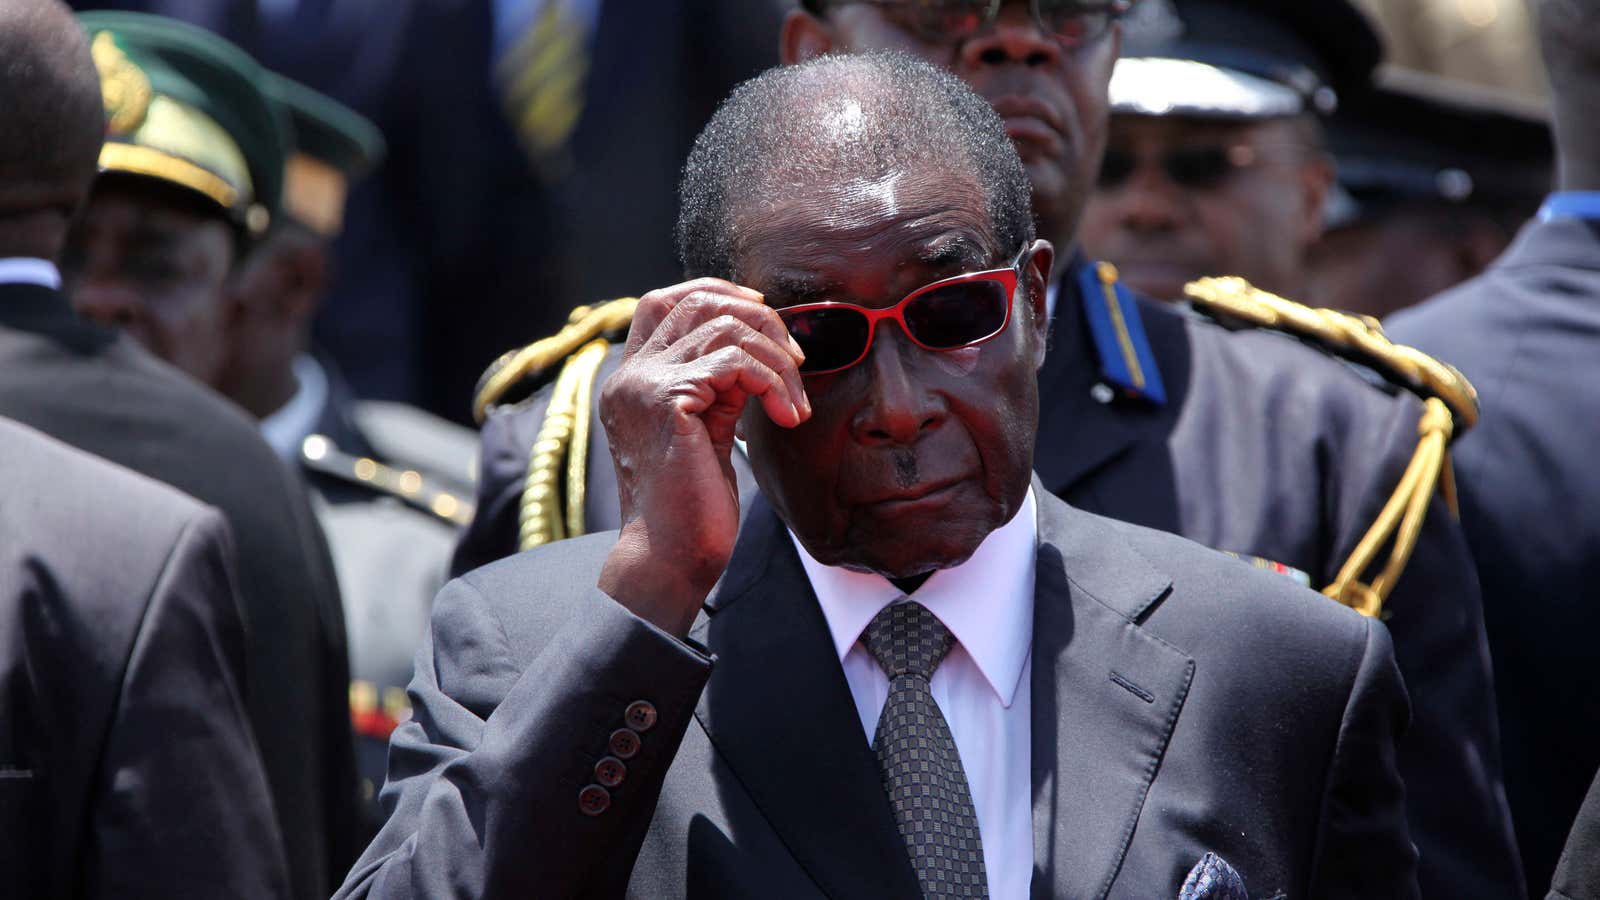 Does Robert Mugabe look like the president of a country with less money in the bank than you?